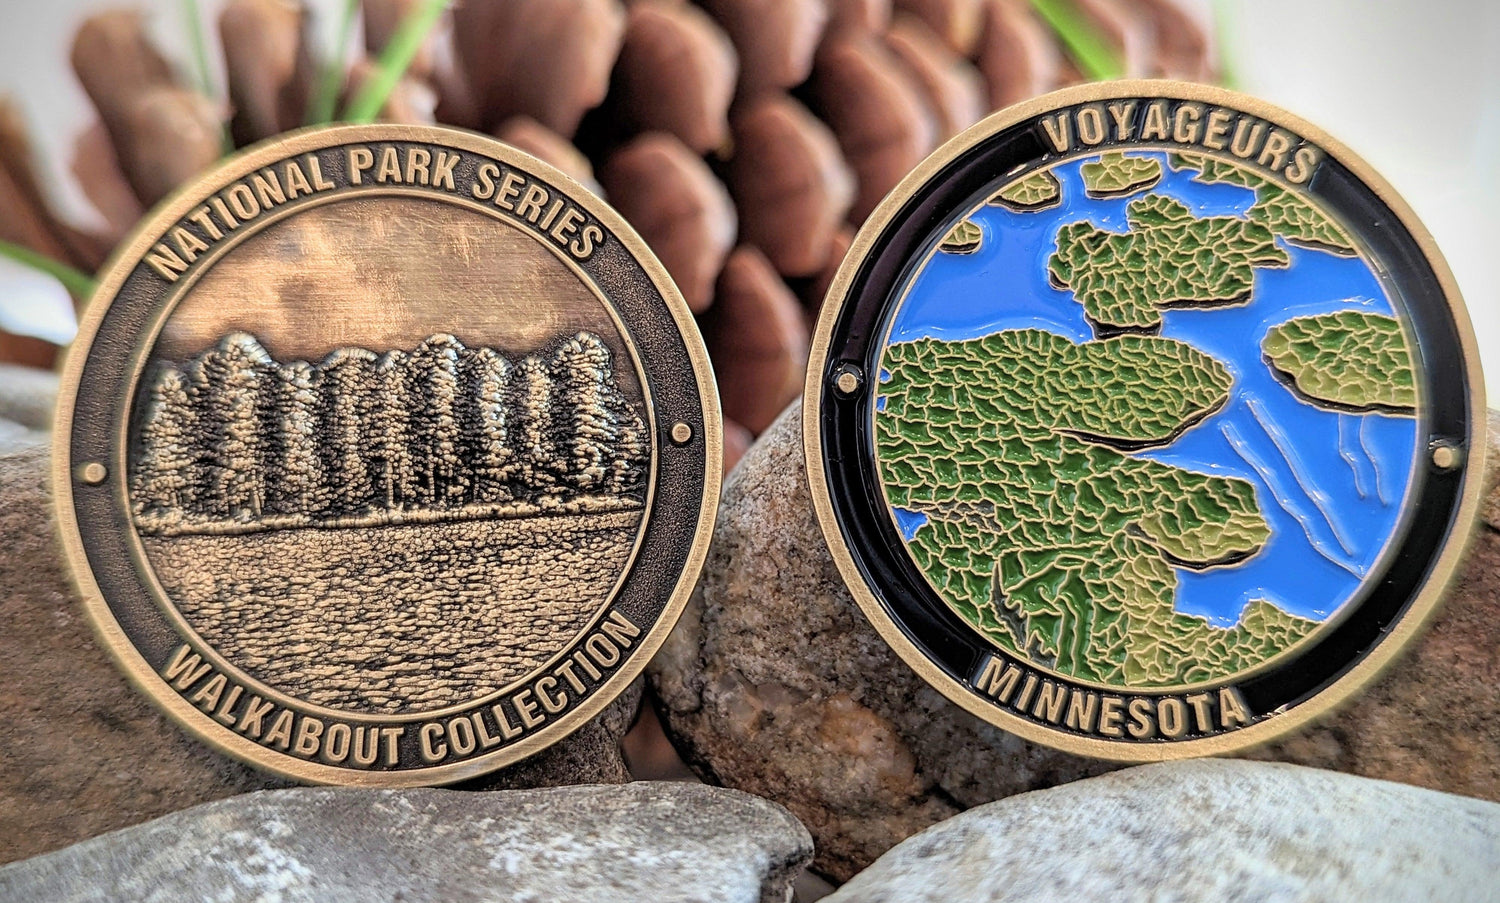 A round challenge coin with a gold-colored edge and a colorful image of a lake surrounded by trees. 